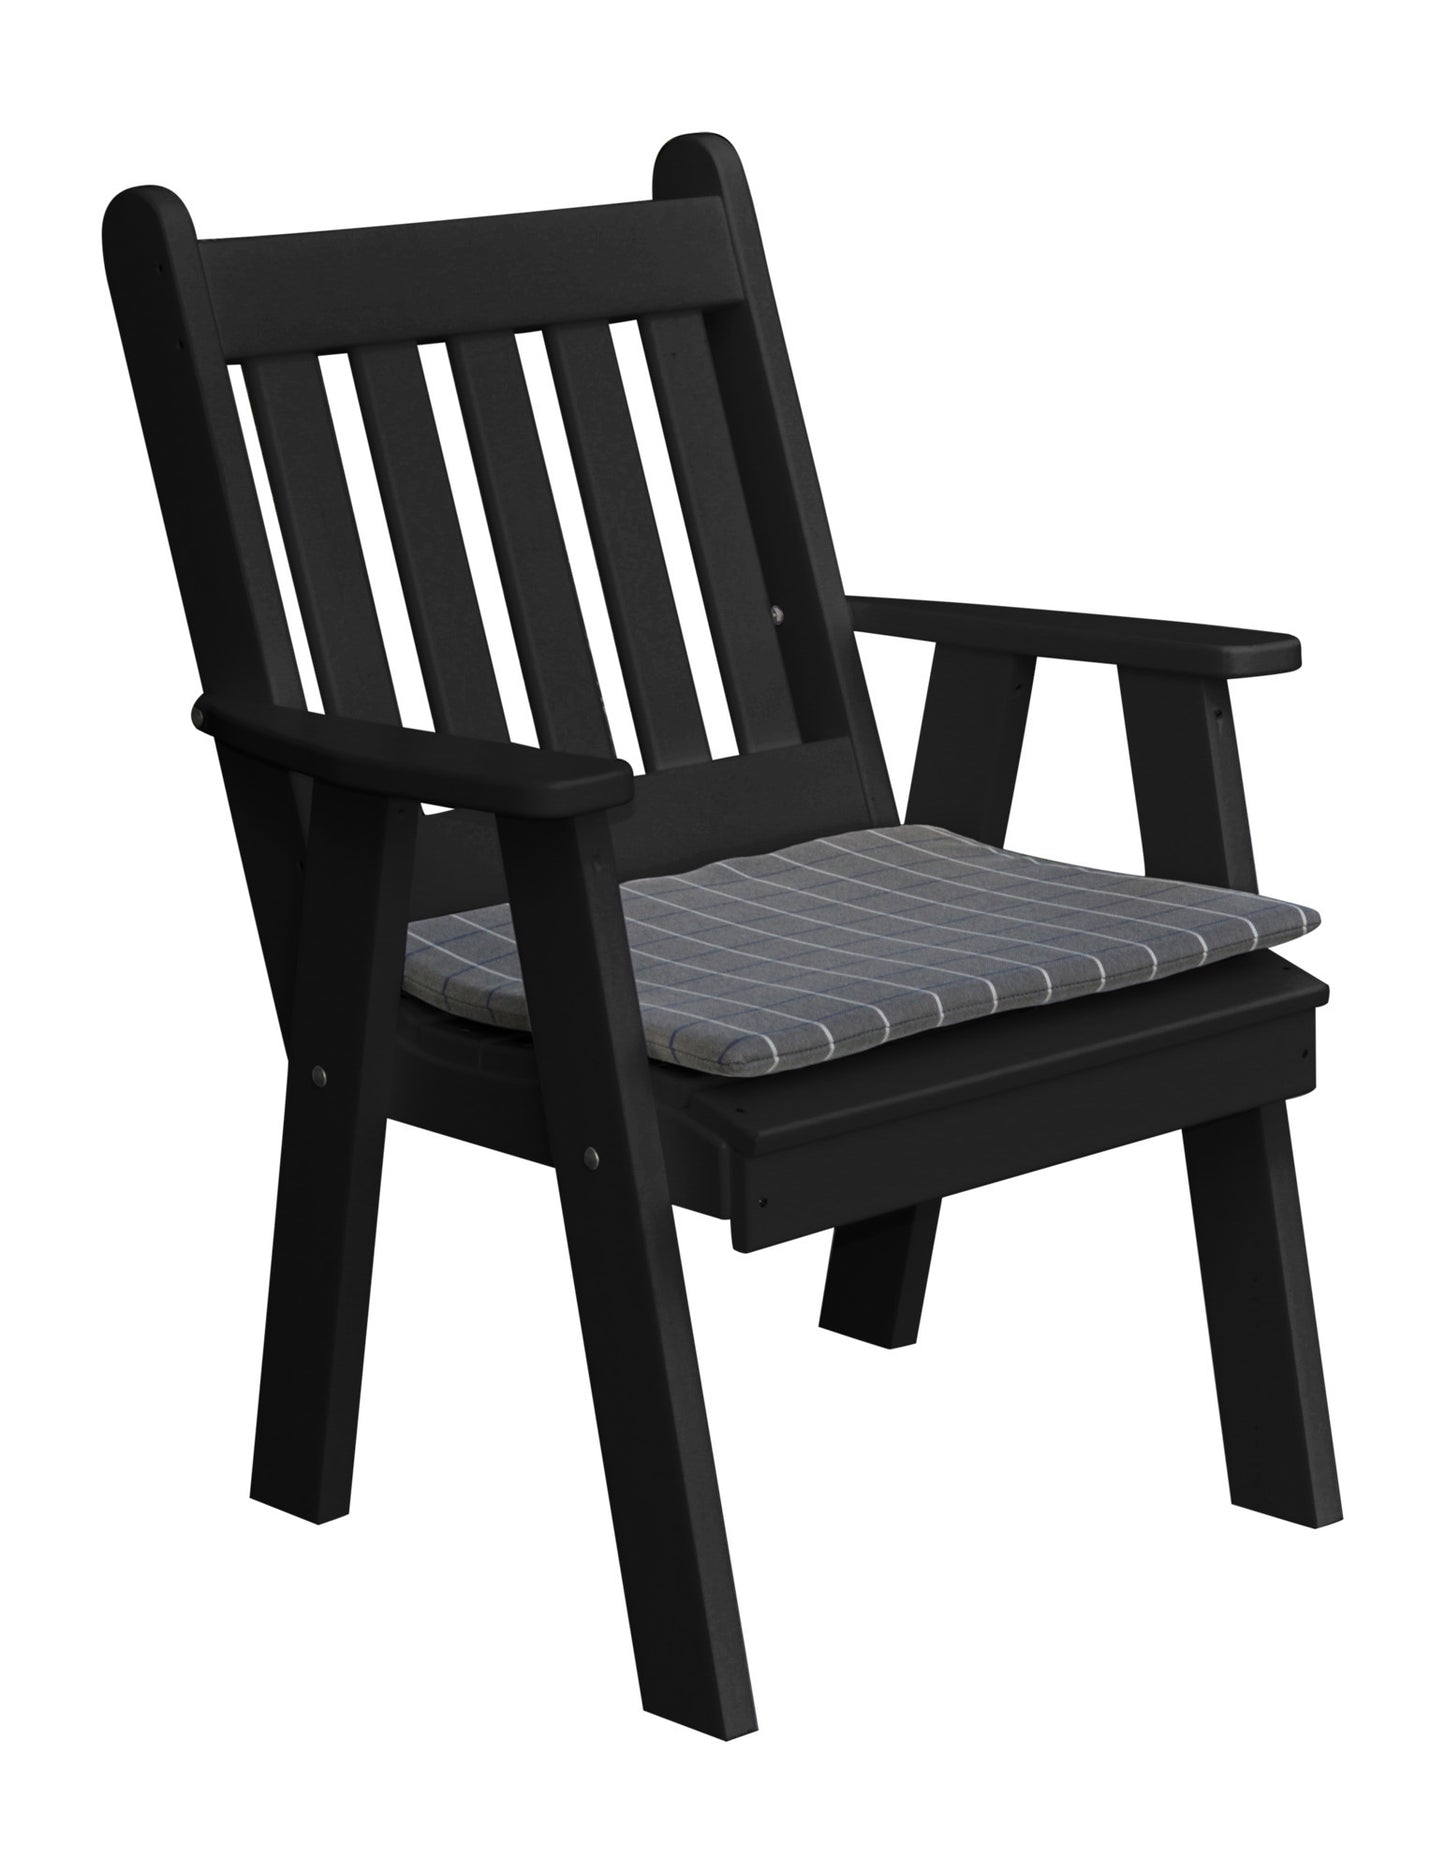 A&L Furniture Company Recycled Plastic Traditional English Deck Chair - LEAD TIME TO SHIP 10 BUSINESS DAYS